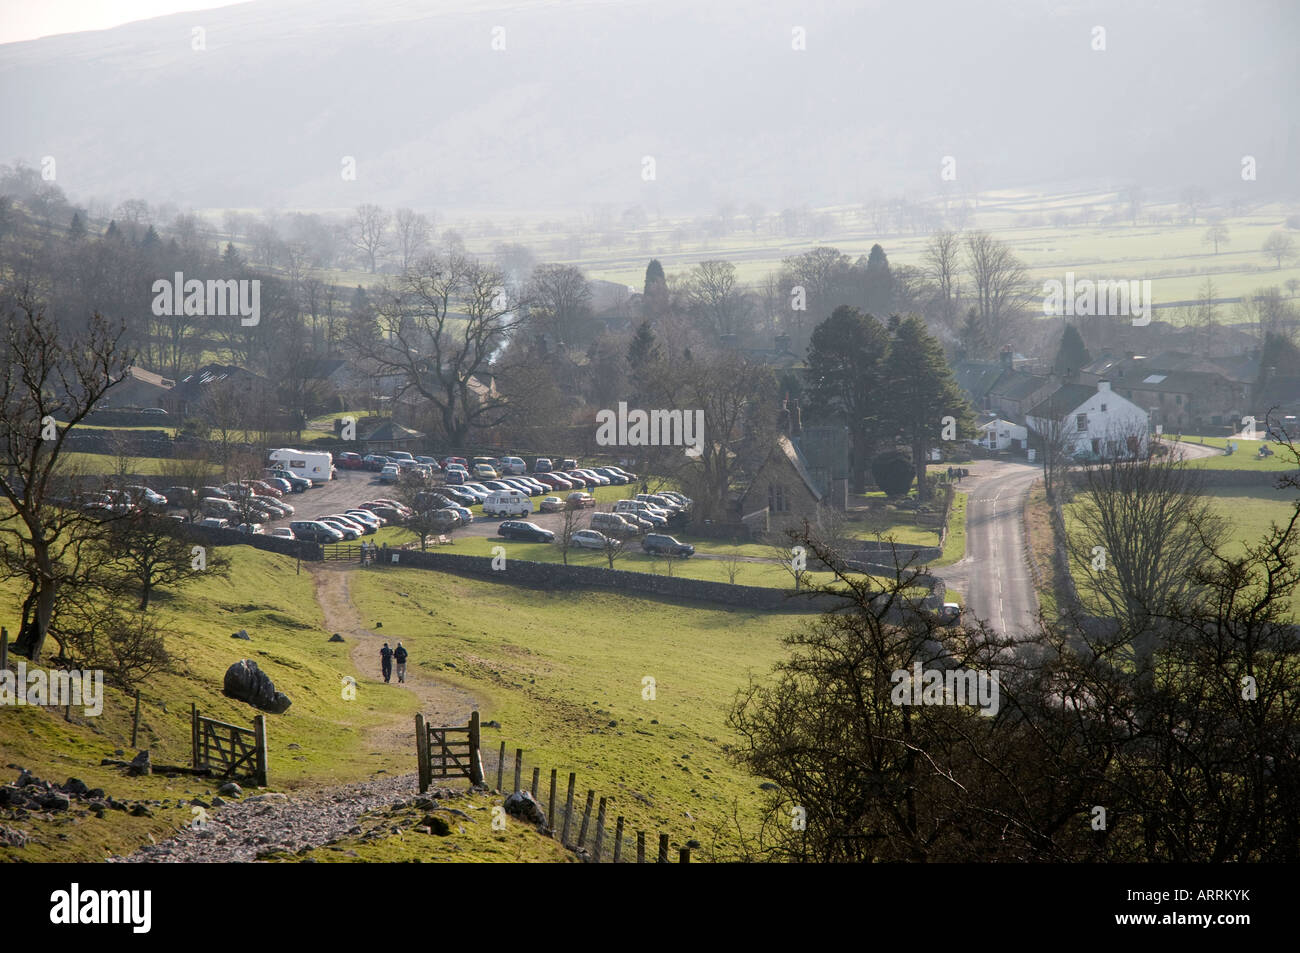 Car Park for hill walkers, Buckden, Upper Wharfedale, Yorkshire Dales, Northern England Stock Photo